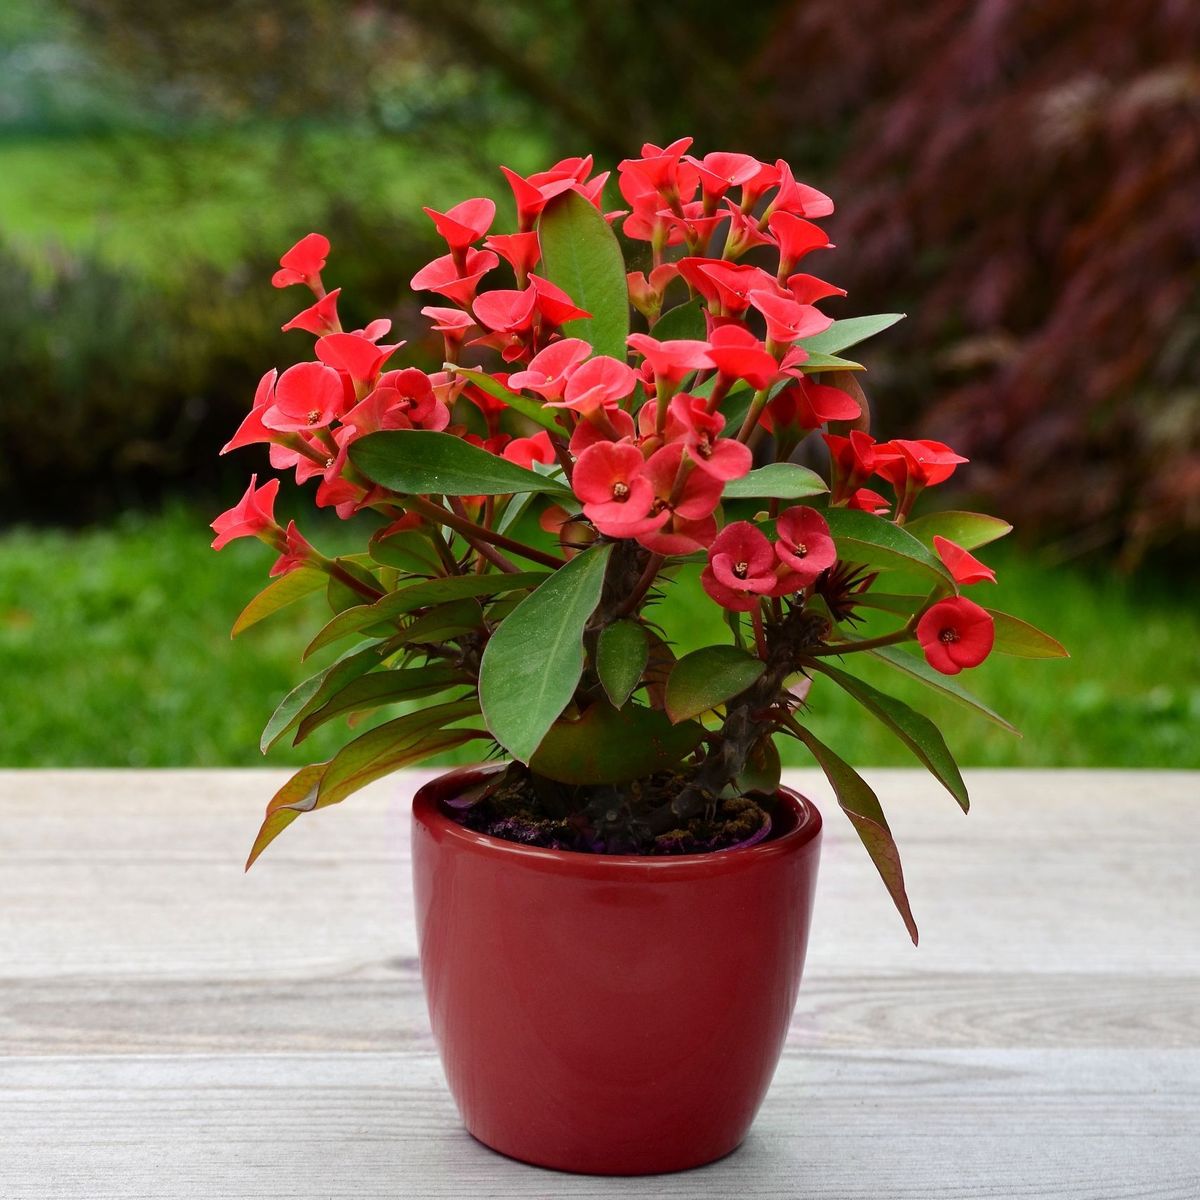 Crown of Thorns is one of the bad luck plants in Feng Shui